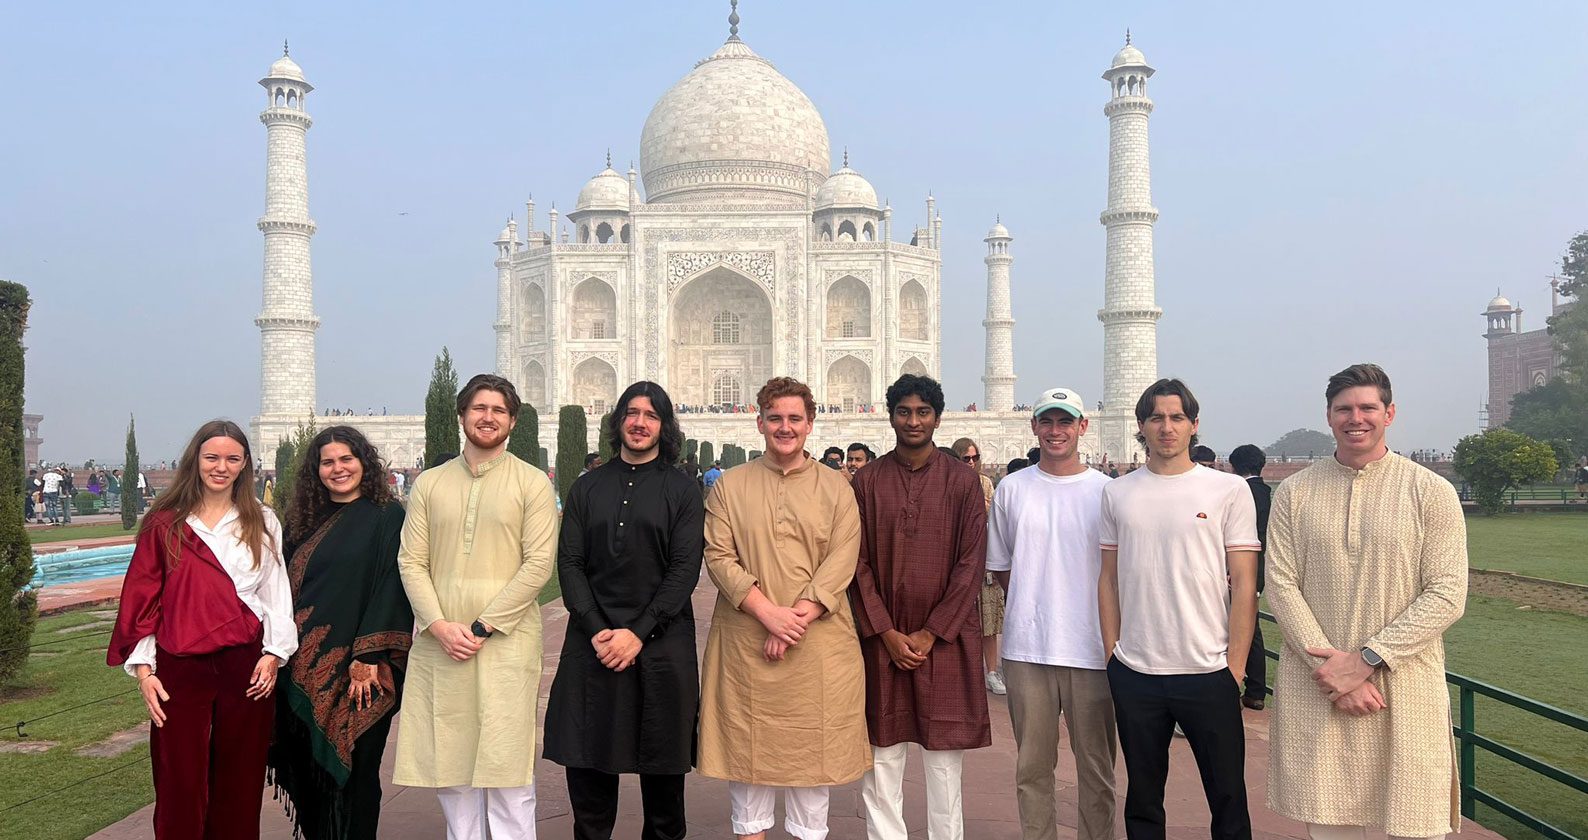 A group of business and law students standing in front of the Taj Mahal in India.